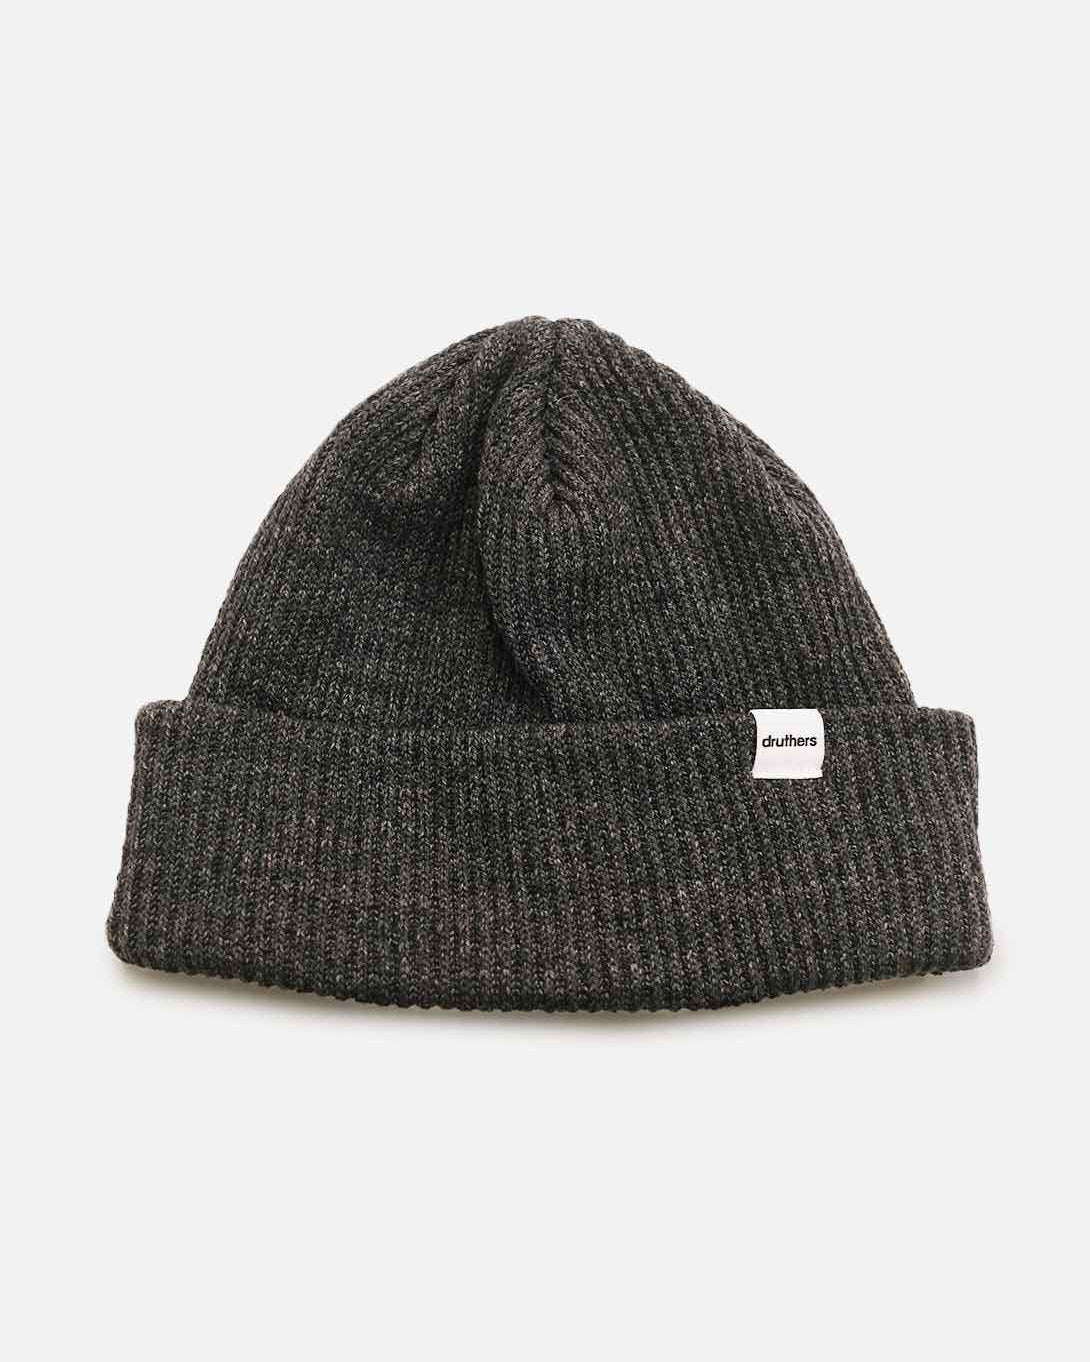 Charcoal ONS Clothing Men's Druthers Knit Beanie